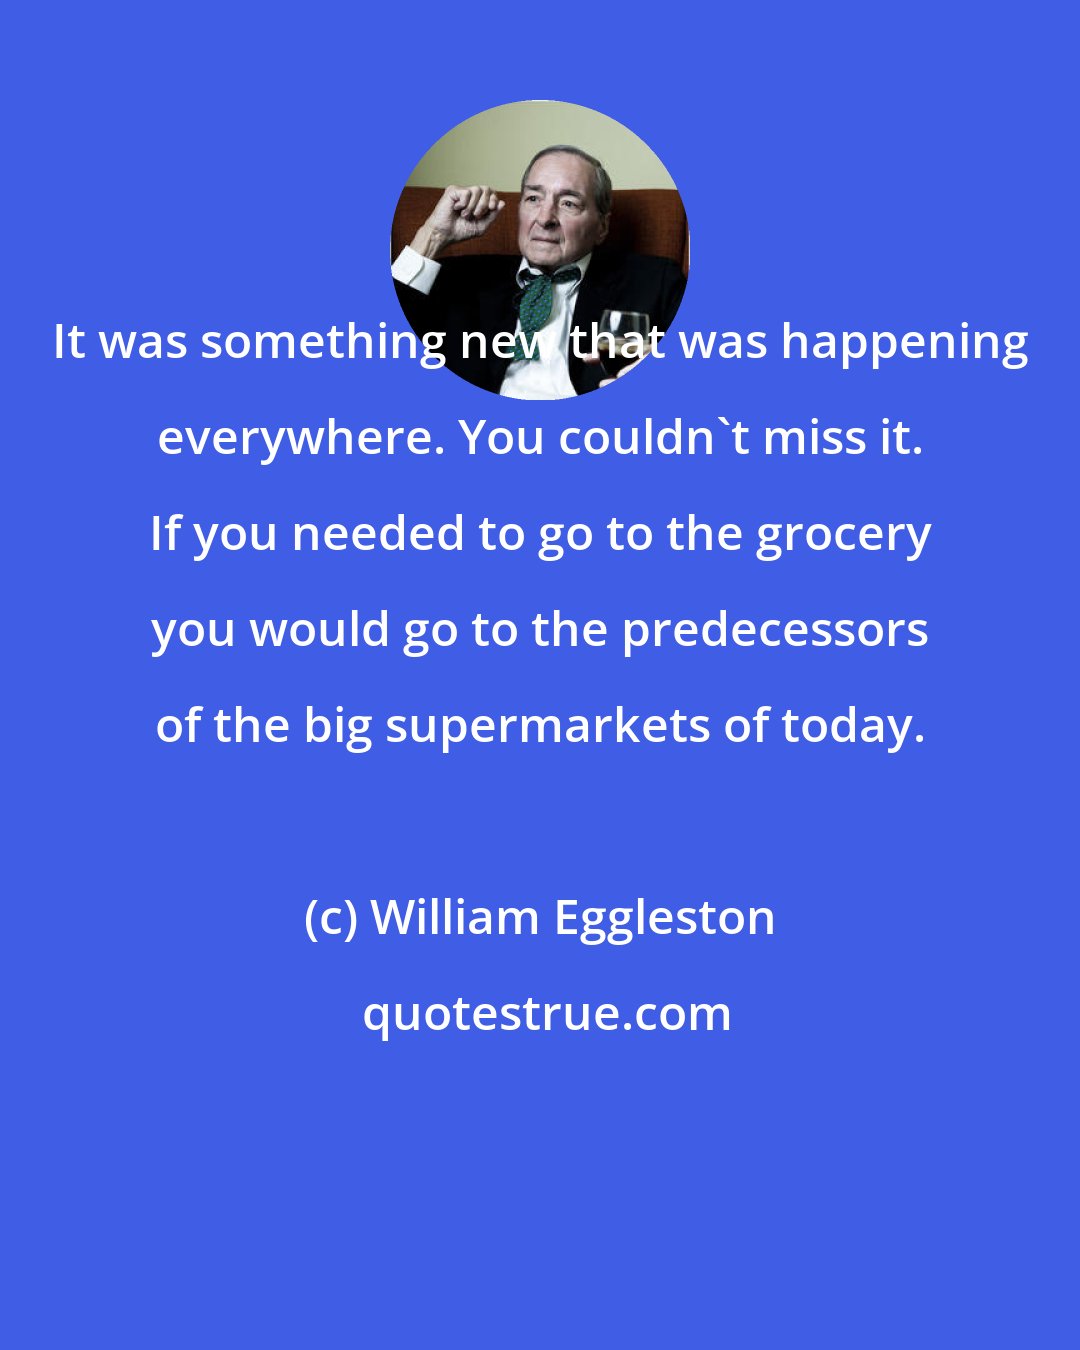 William Eggleston: It was something new that was happening everywhere. You couldn't miss it. If you needed to go to the grocery you would go to the predecessors of the big supermarkets of today.